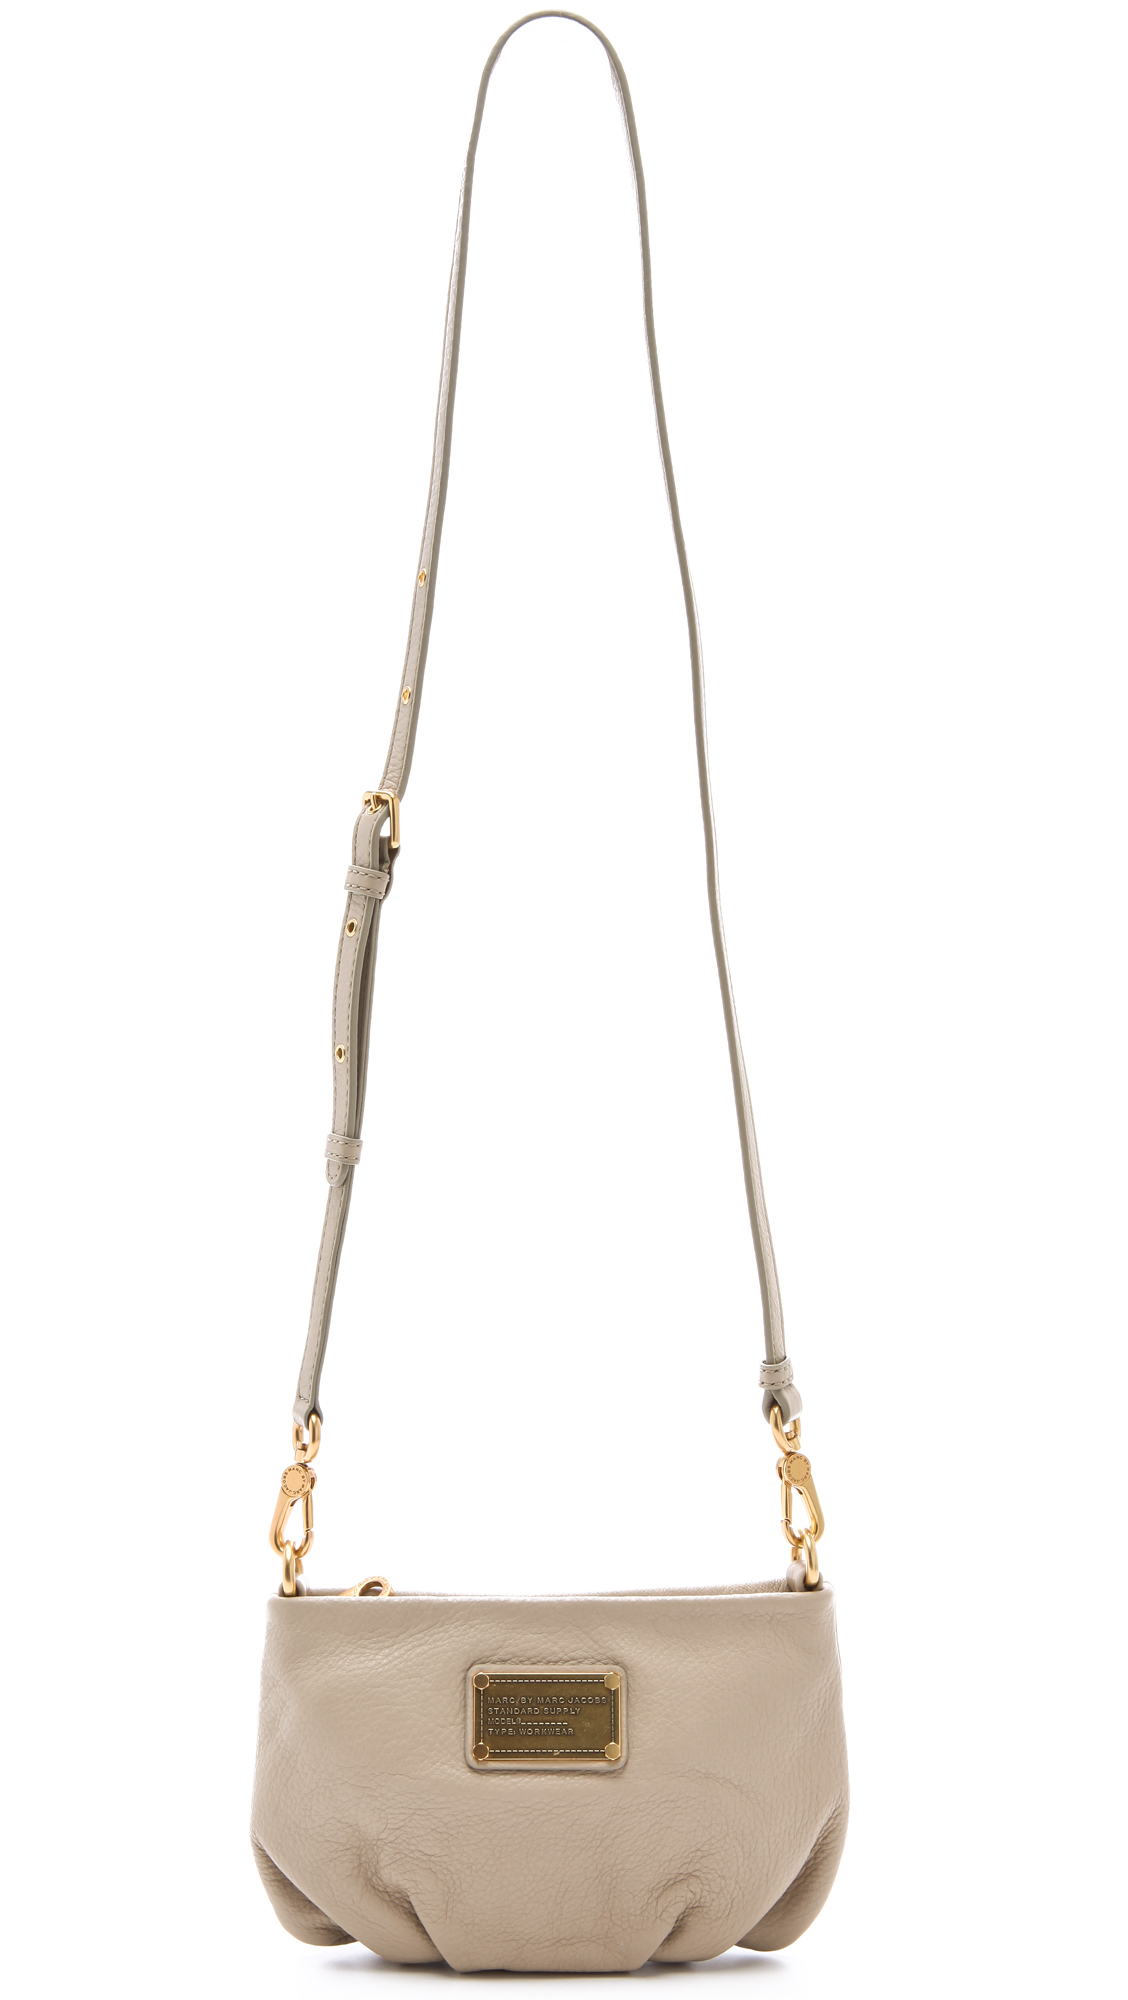 Marc By Marc Jacobs Classic Q Percy Cross Body Bag in Natural | Lyst